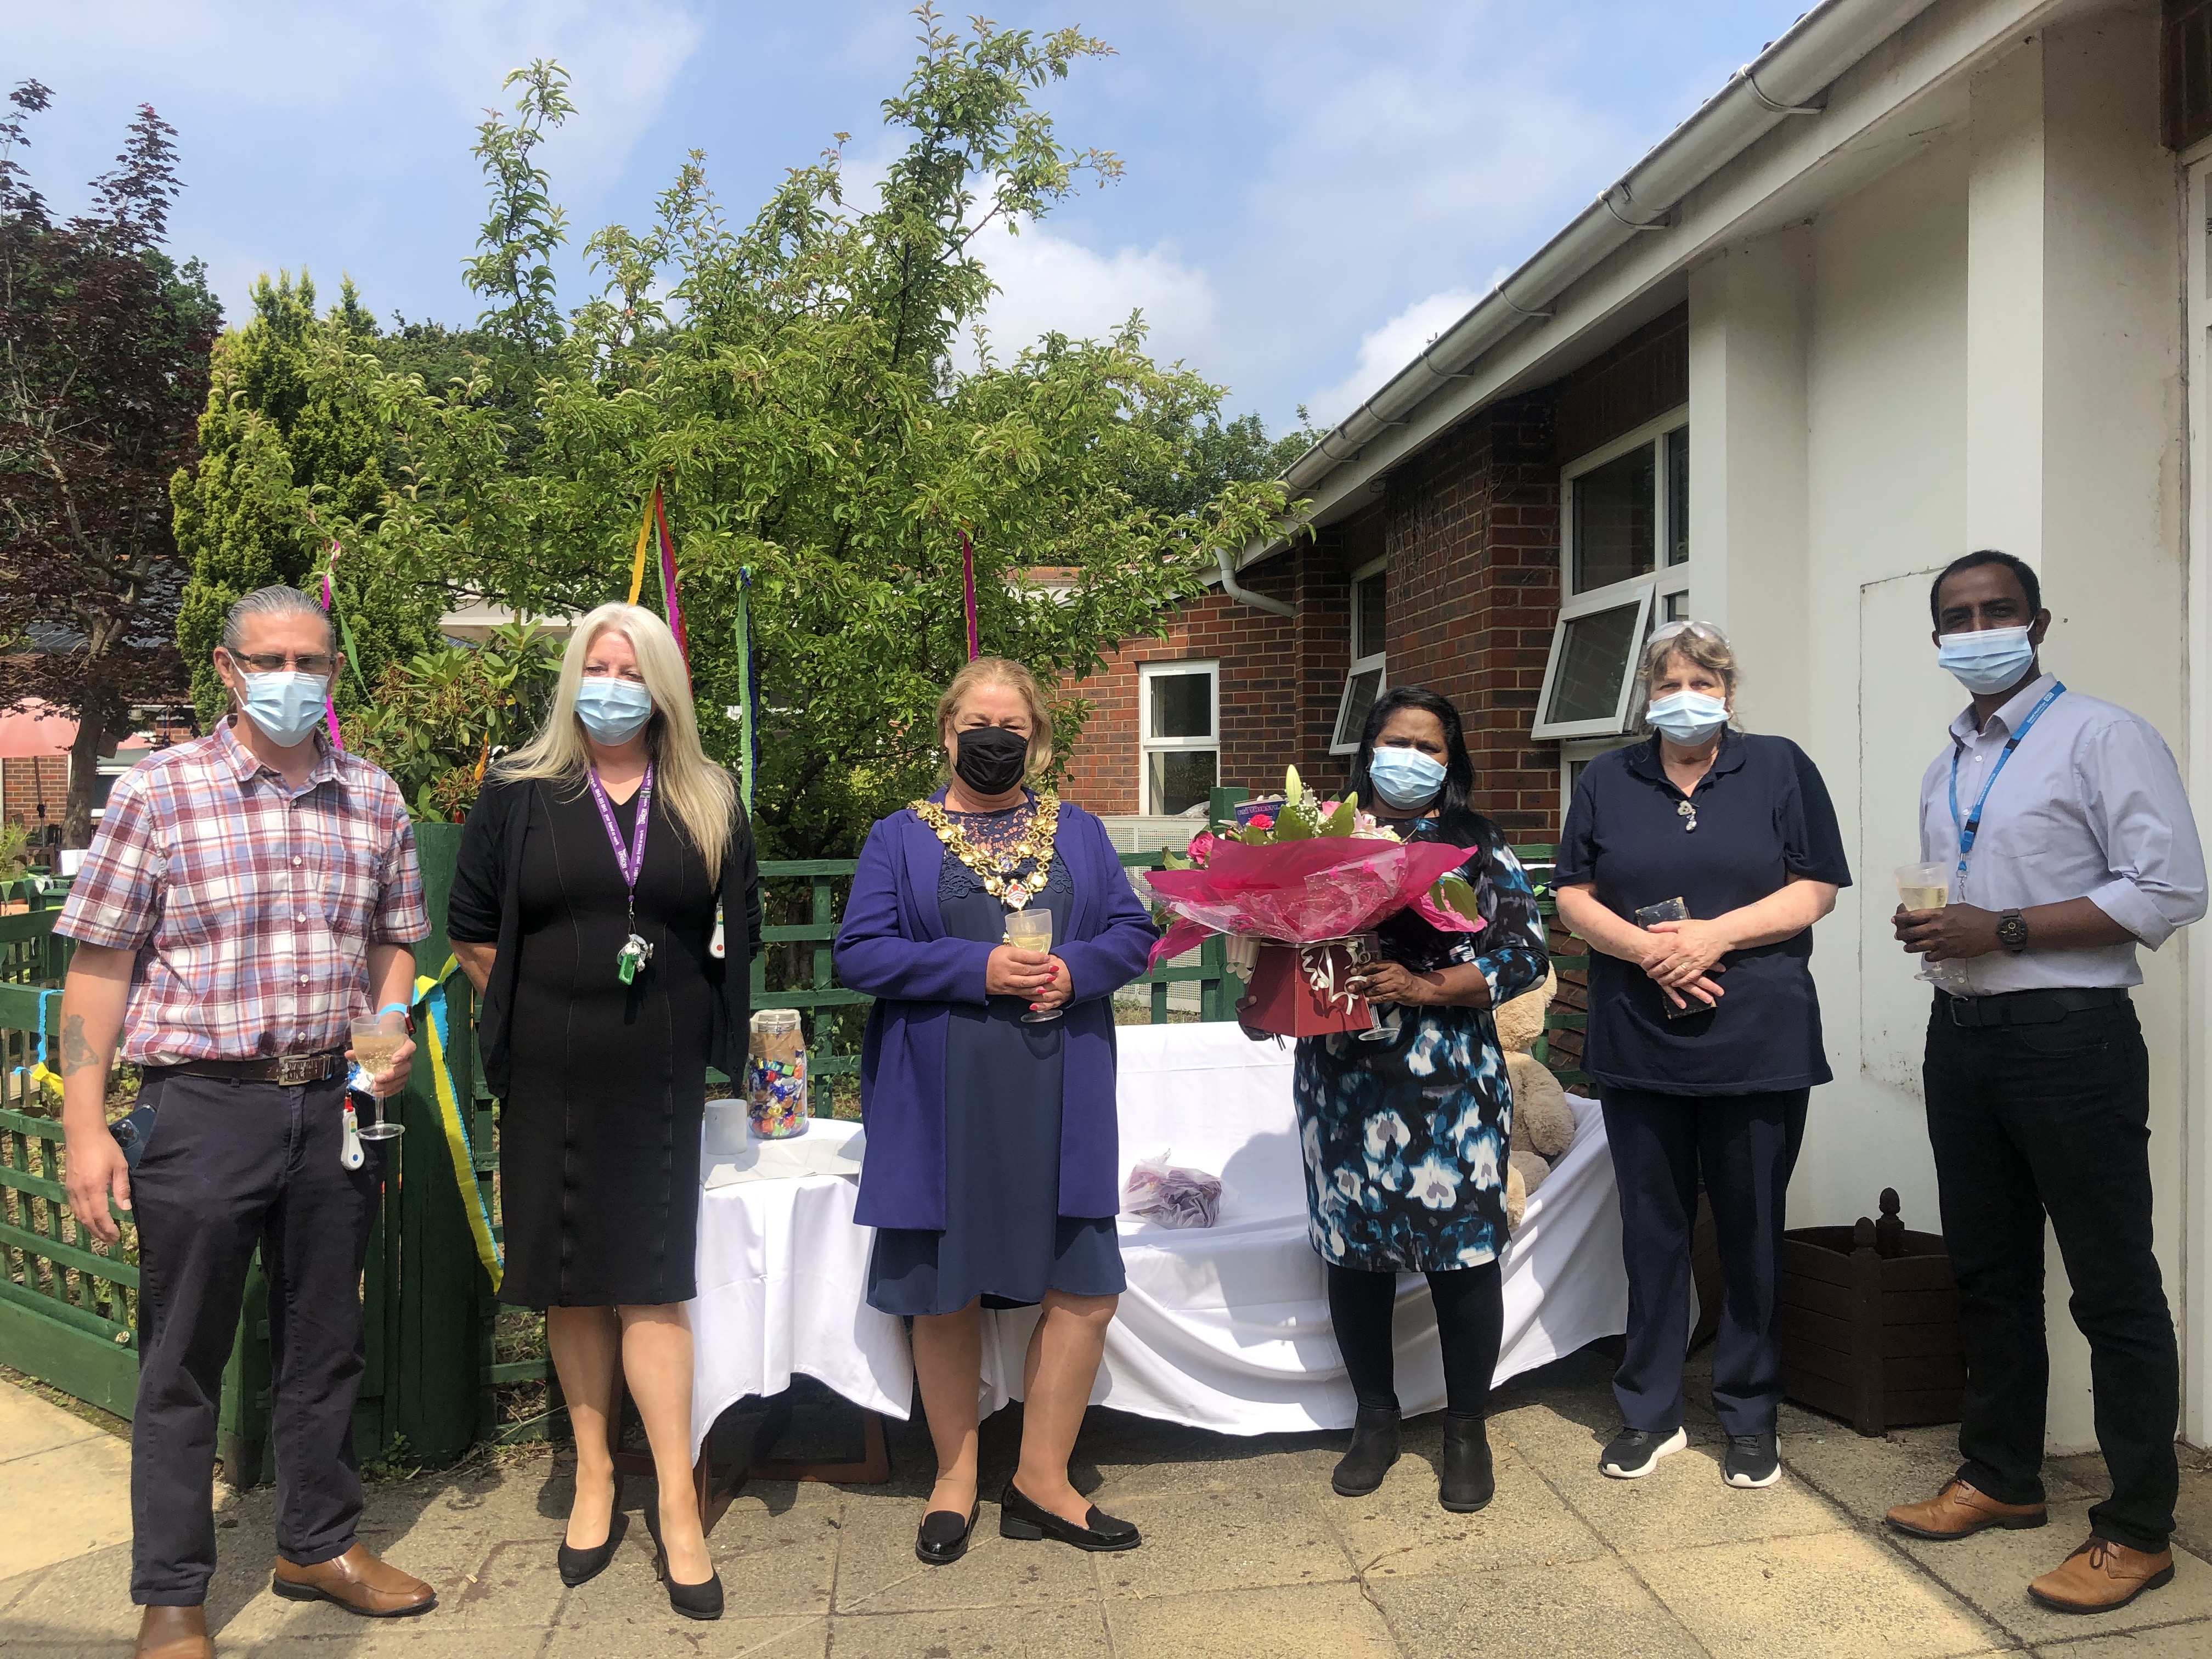 Garden party at Alderney Hospital supports dementia patients